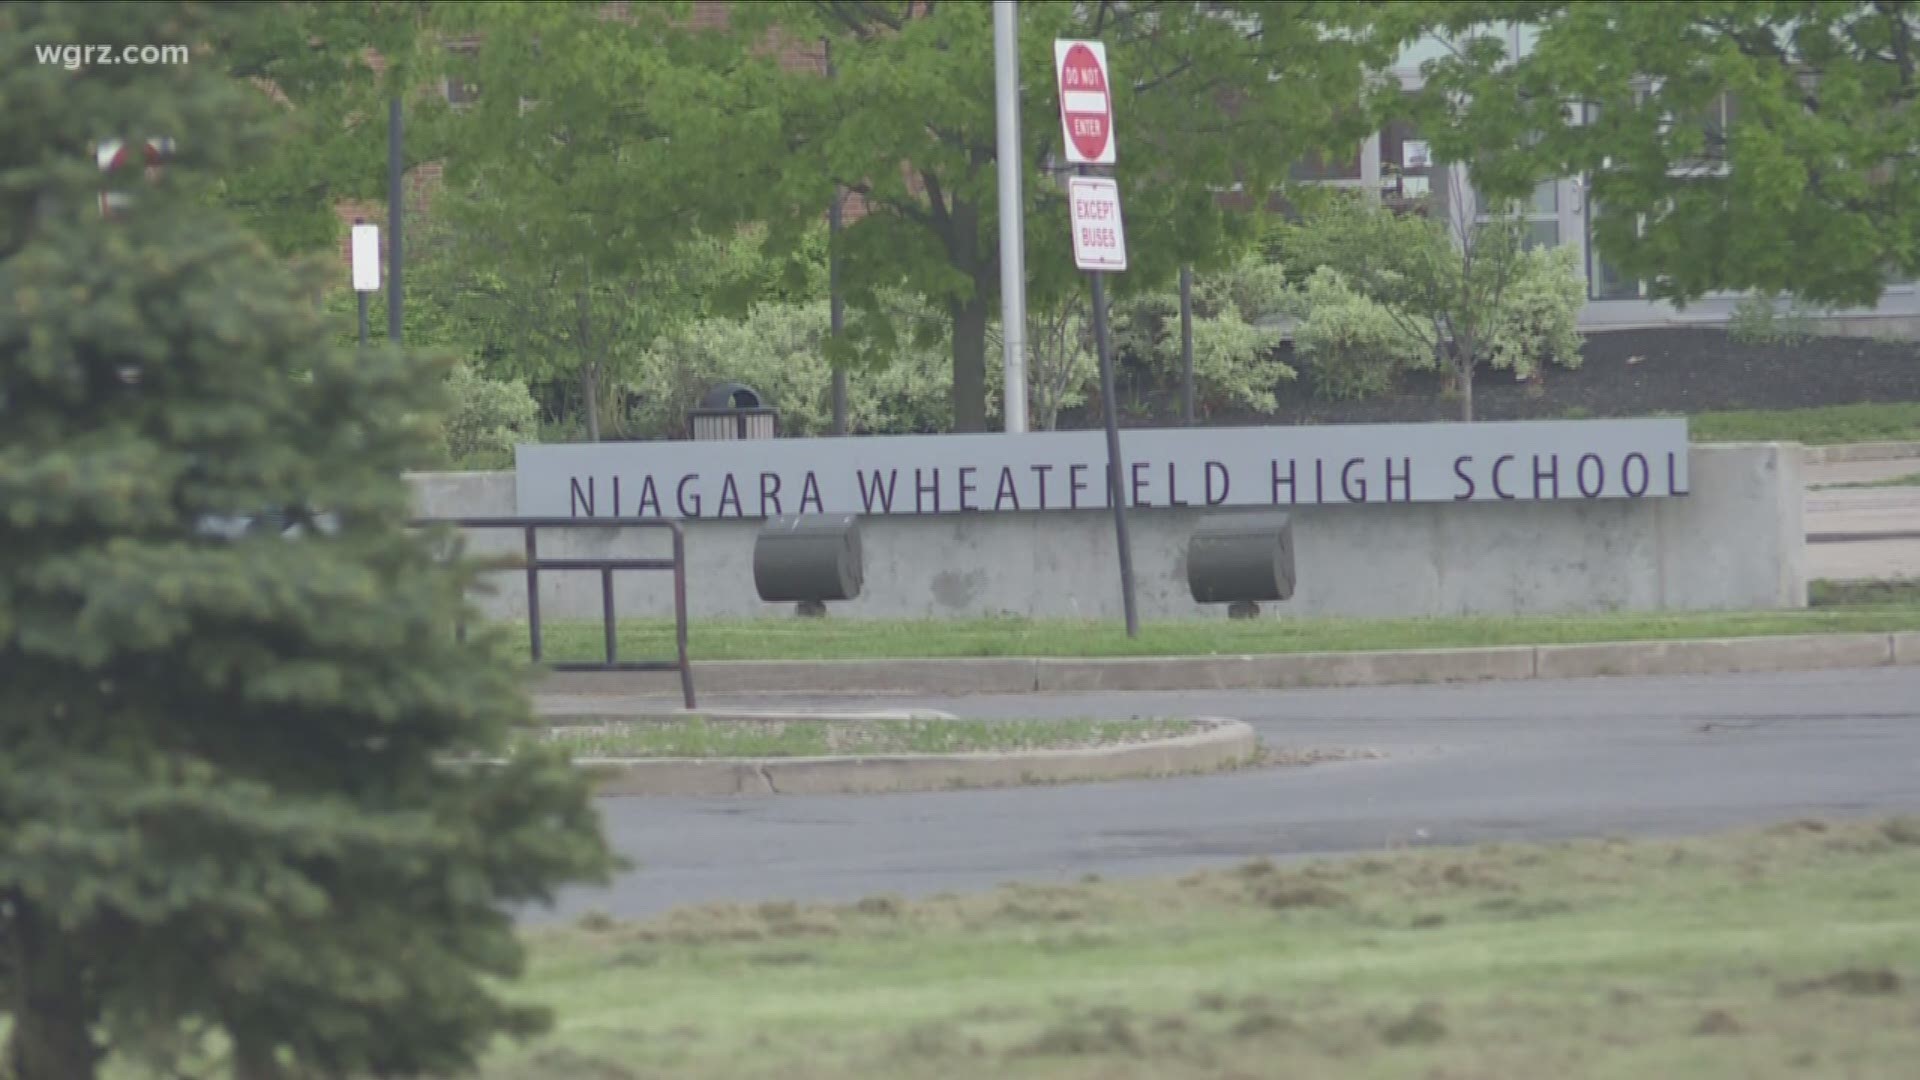 A rape case involving 2 students at Niagara Wheatfield High School - that caused protests, suspensions, and now an investigation.